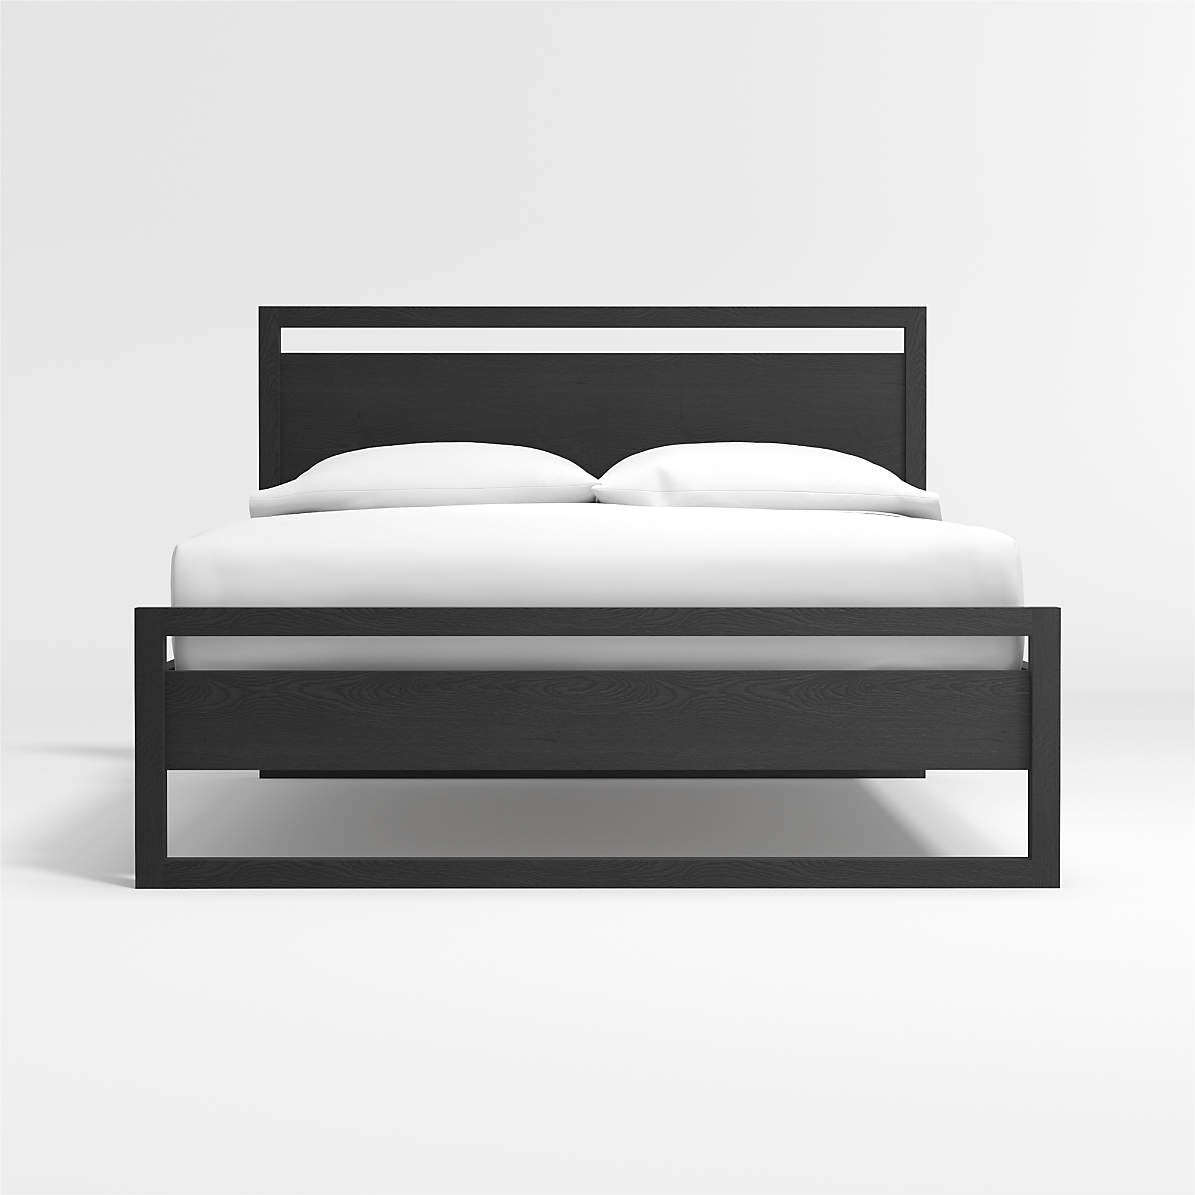 Linea Black Bed Crate And Barrel, Crate And Barrel King Size Bed